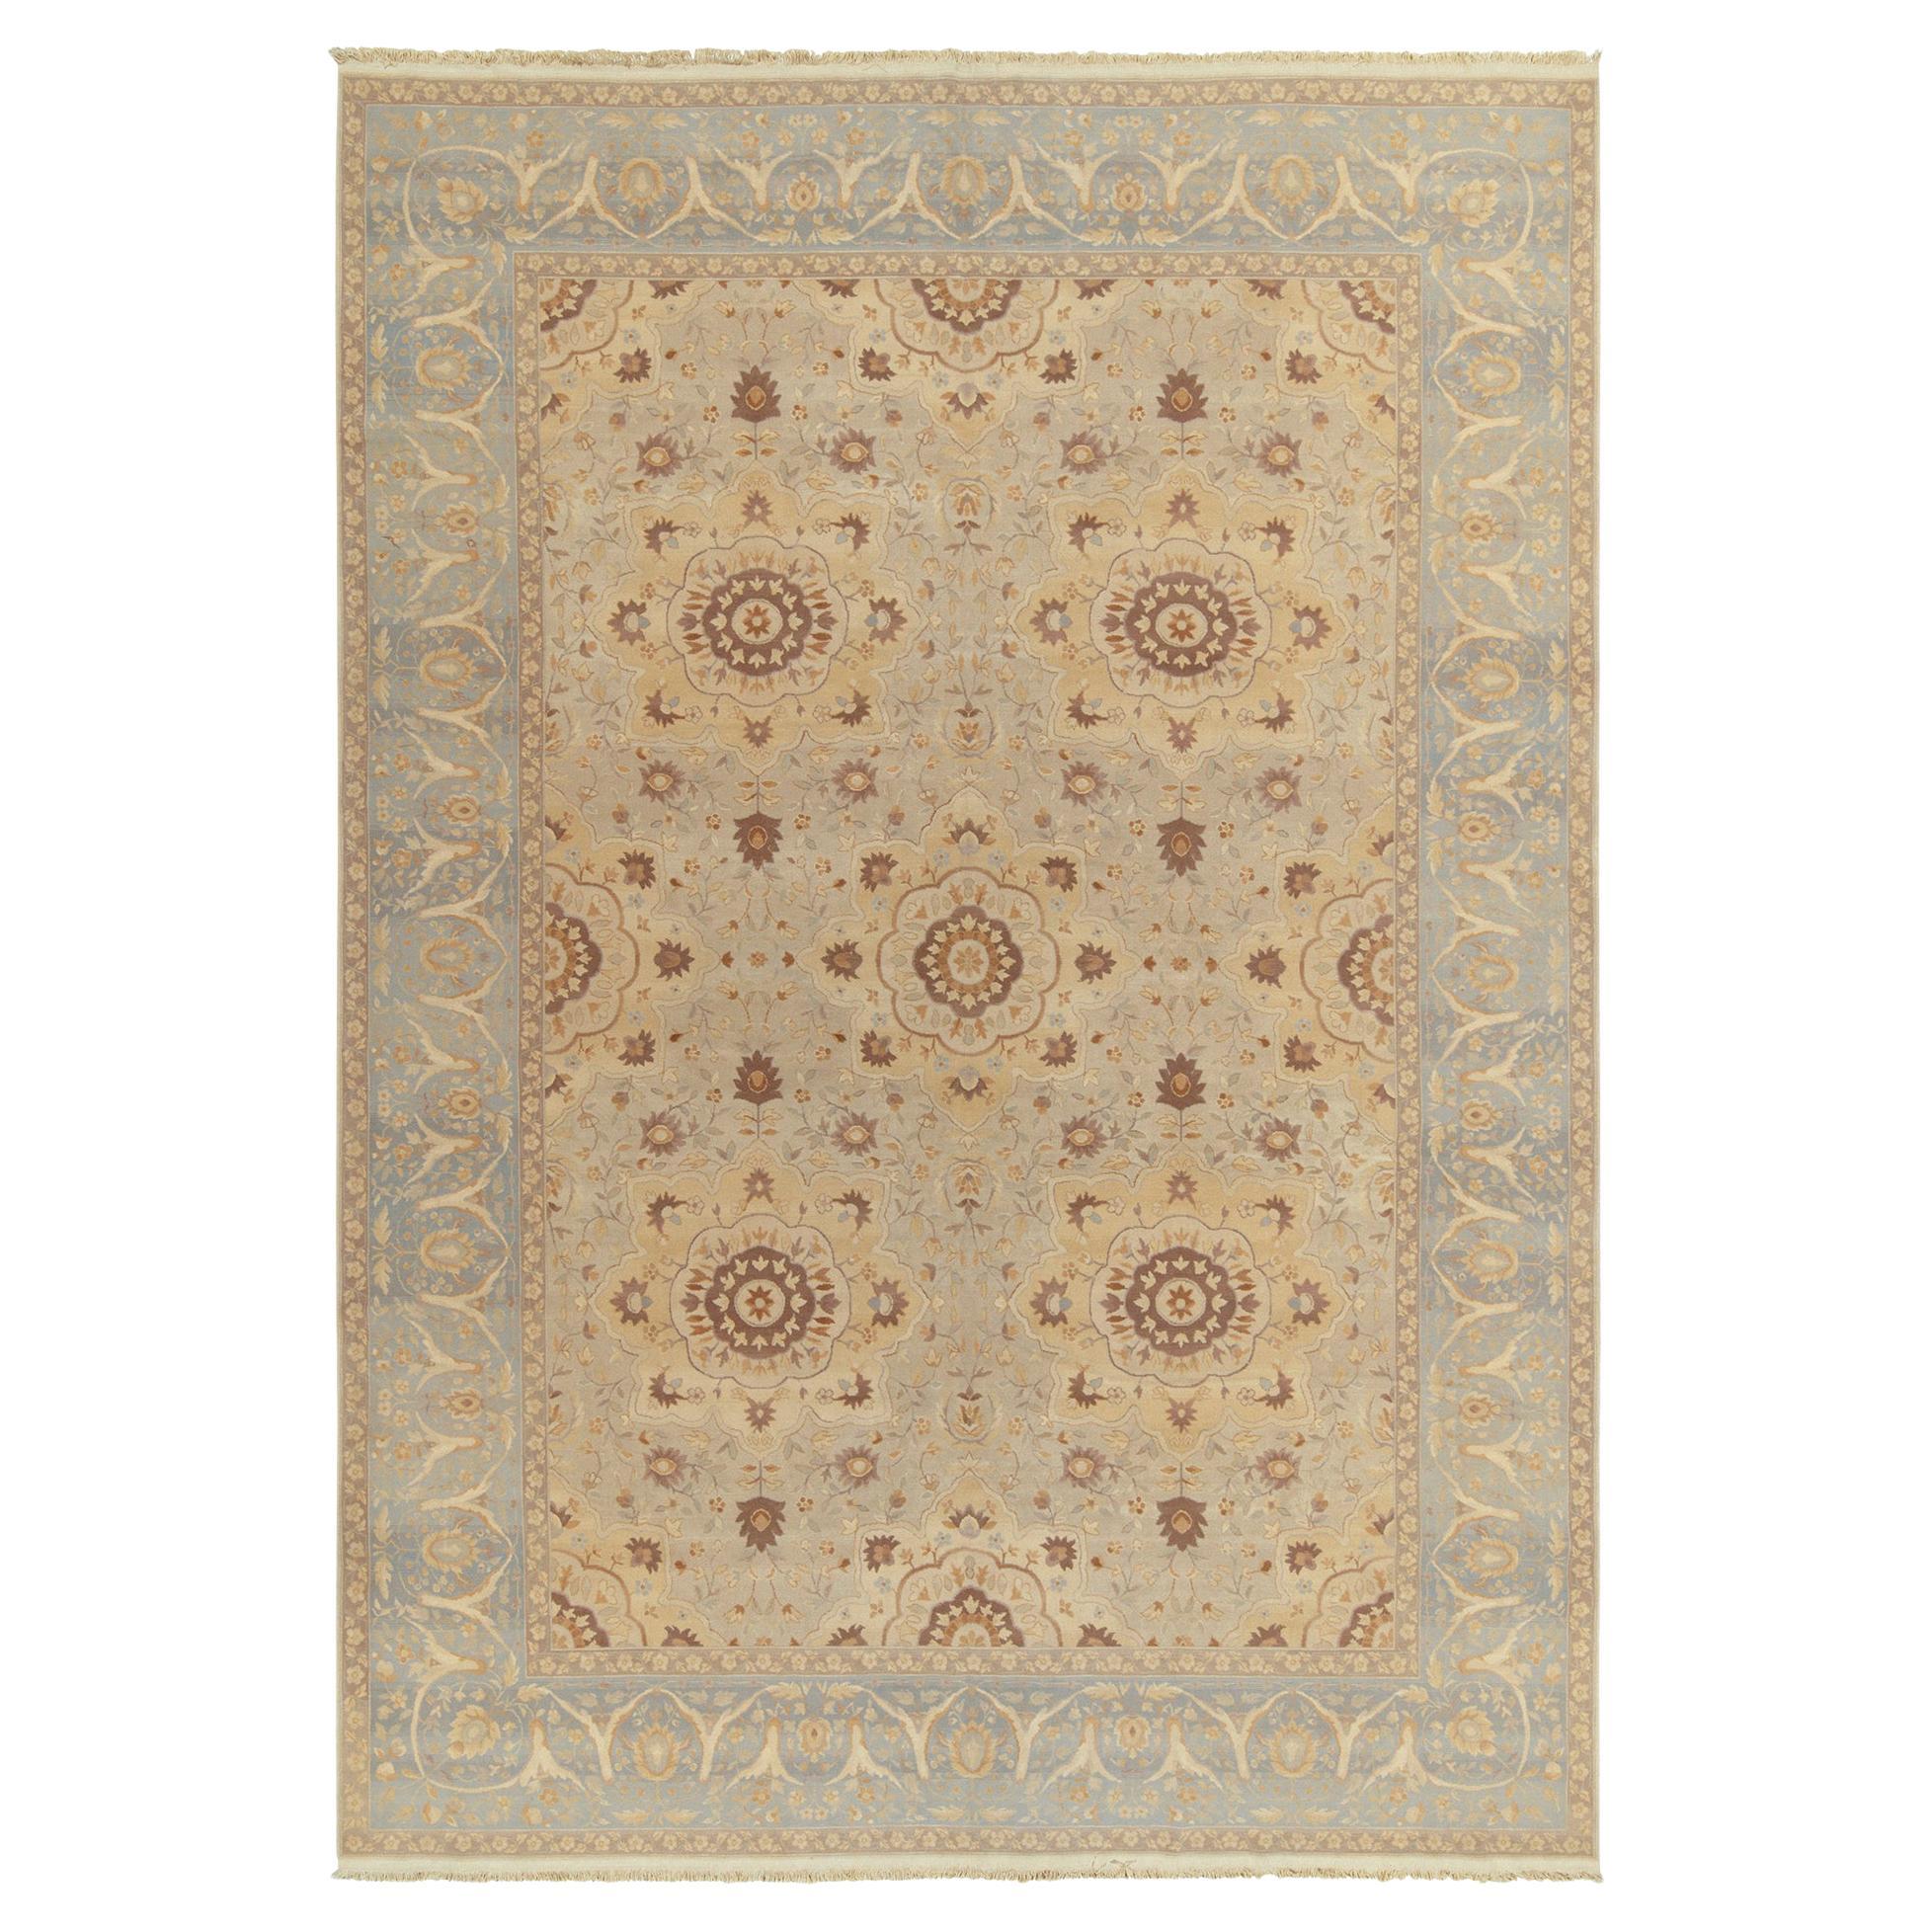 Rug & Kilim's Sultanabad Style Rug in Beige-Brown & Blue Floral Pattern For Sale